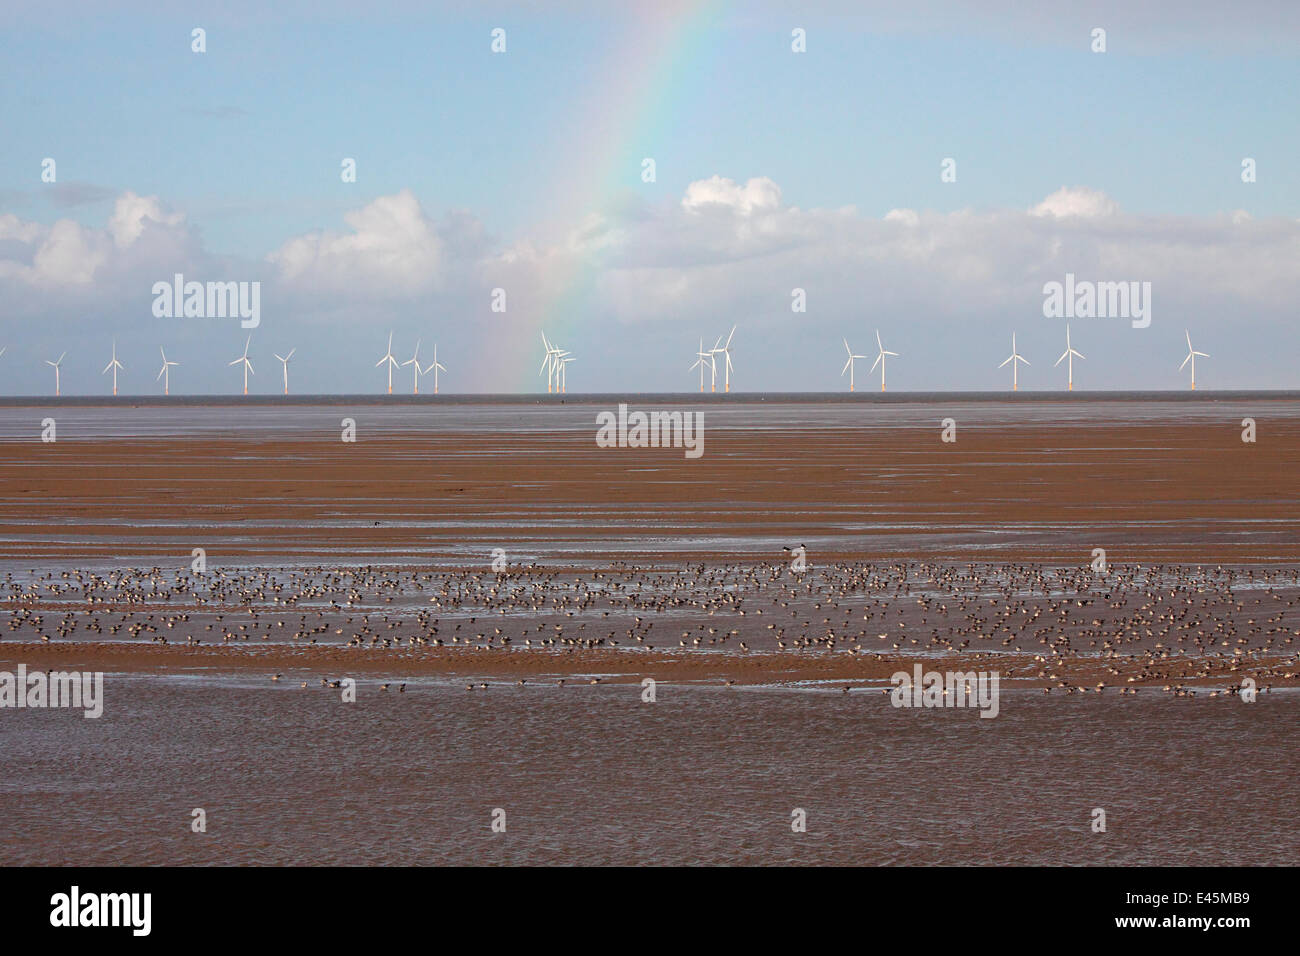 Wading birds feeding on shore after the tide has gone out, with a rainbow and several off-shore wind turbines in background, Liverpool Bay, UK, November. Stock Photo